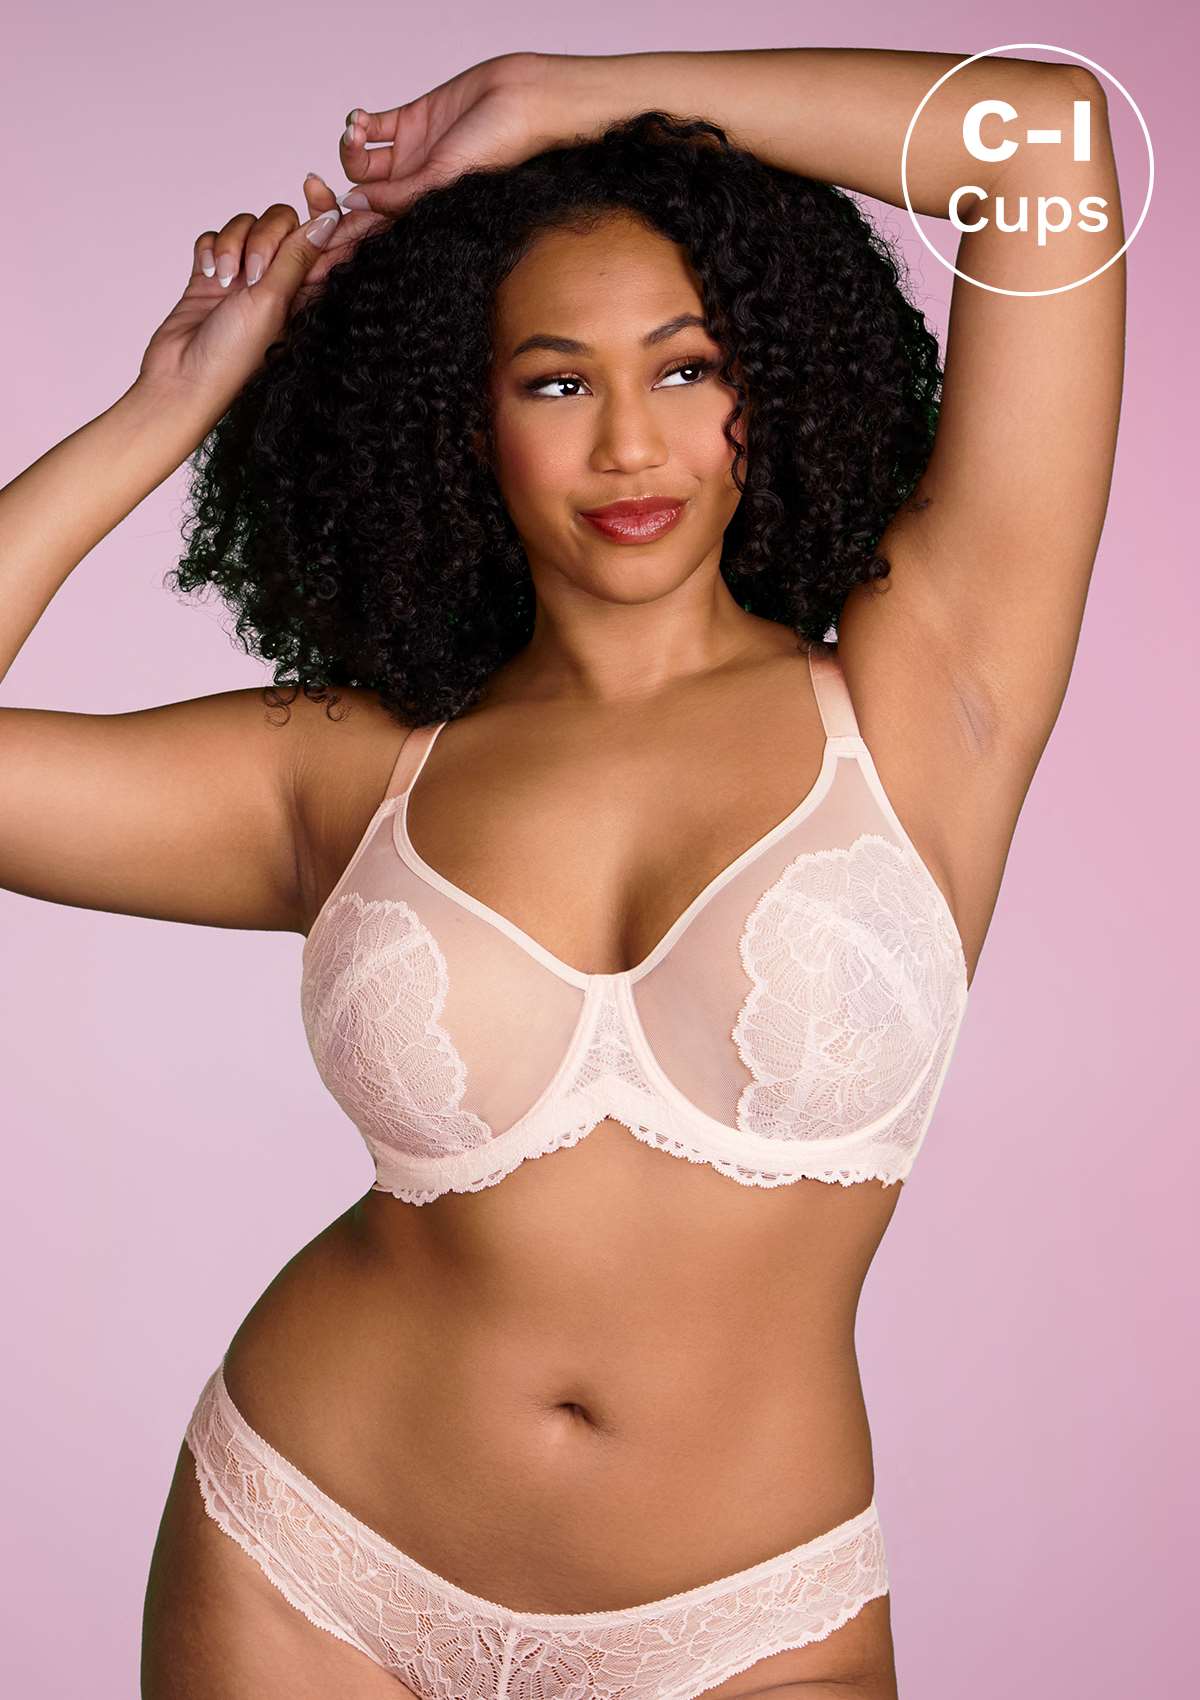 HSIA Blossom Sheer Lace Bra: Comfortable Underwire Bra For Big Busts - White / 42 / DDD/F